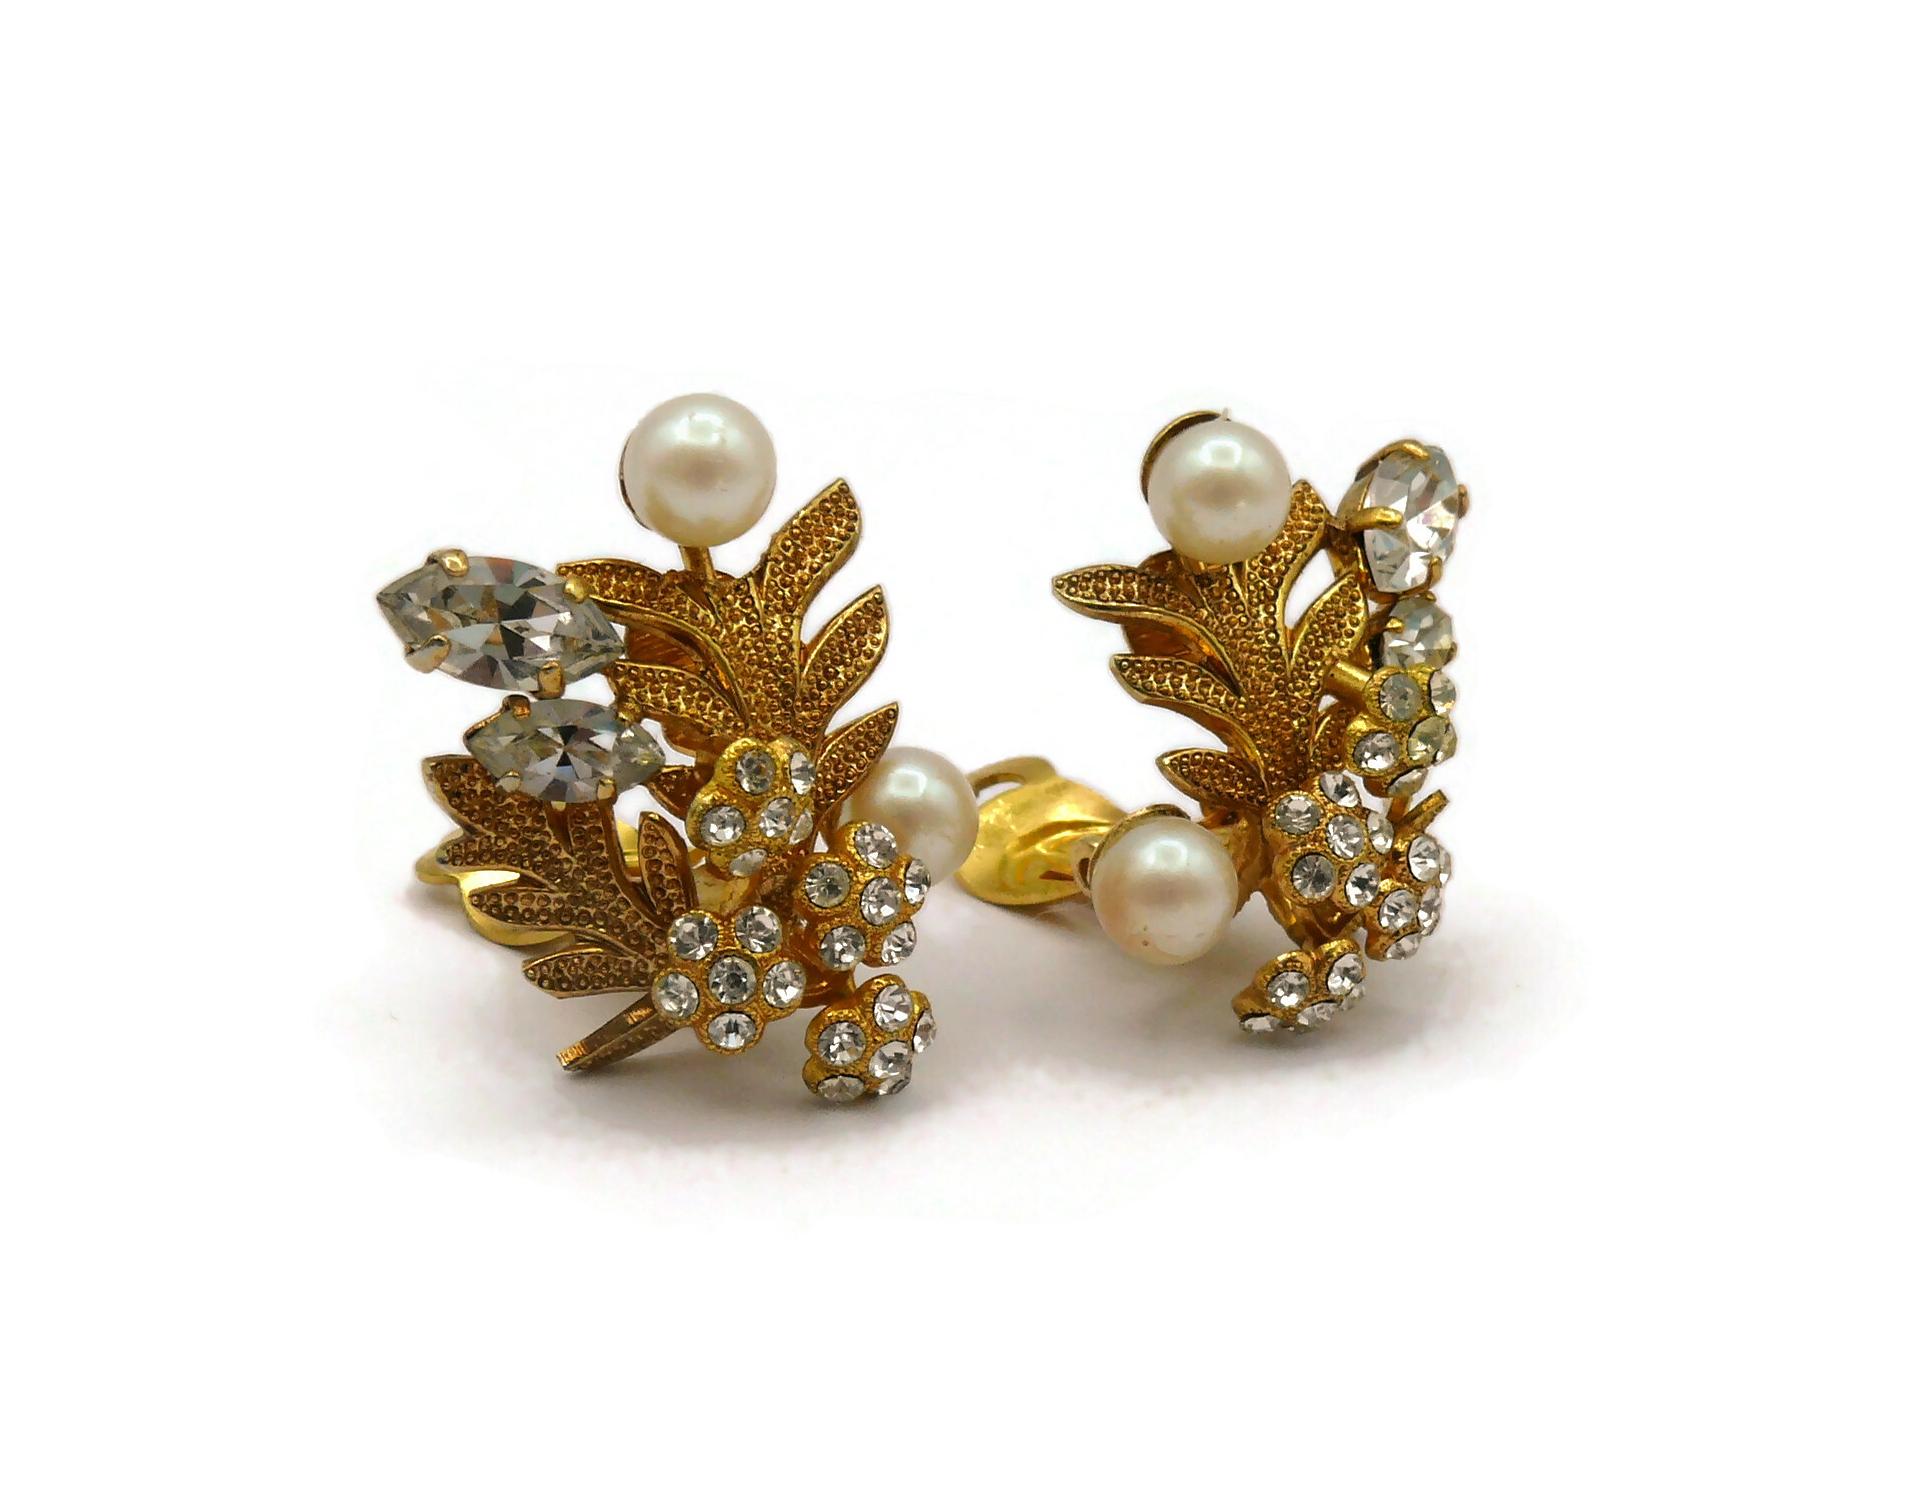 CHRISTIAN DIOR Vintage Jewelled Floral Clip-On Earrings, 1968 In Good Condition For Sale In Nice, FR